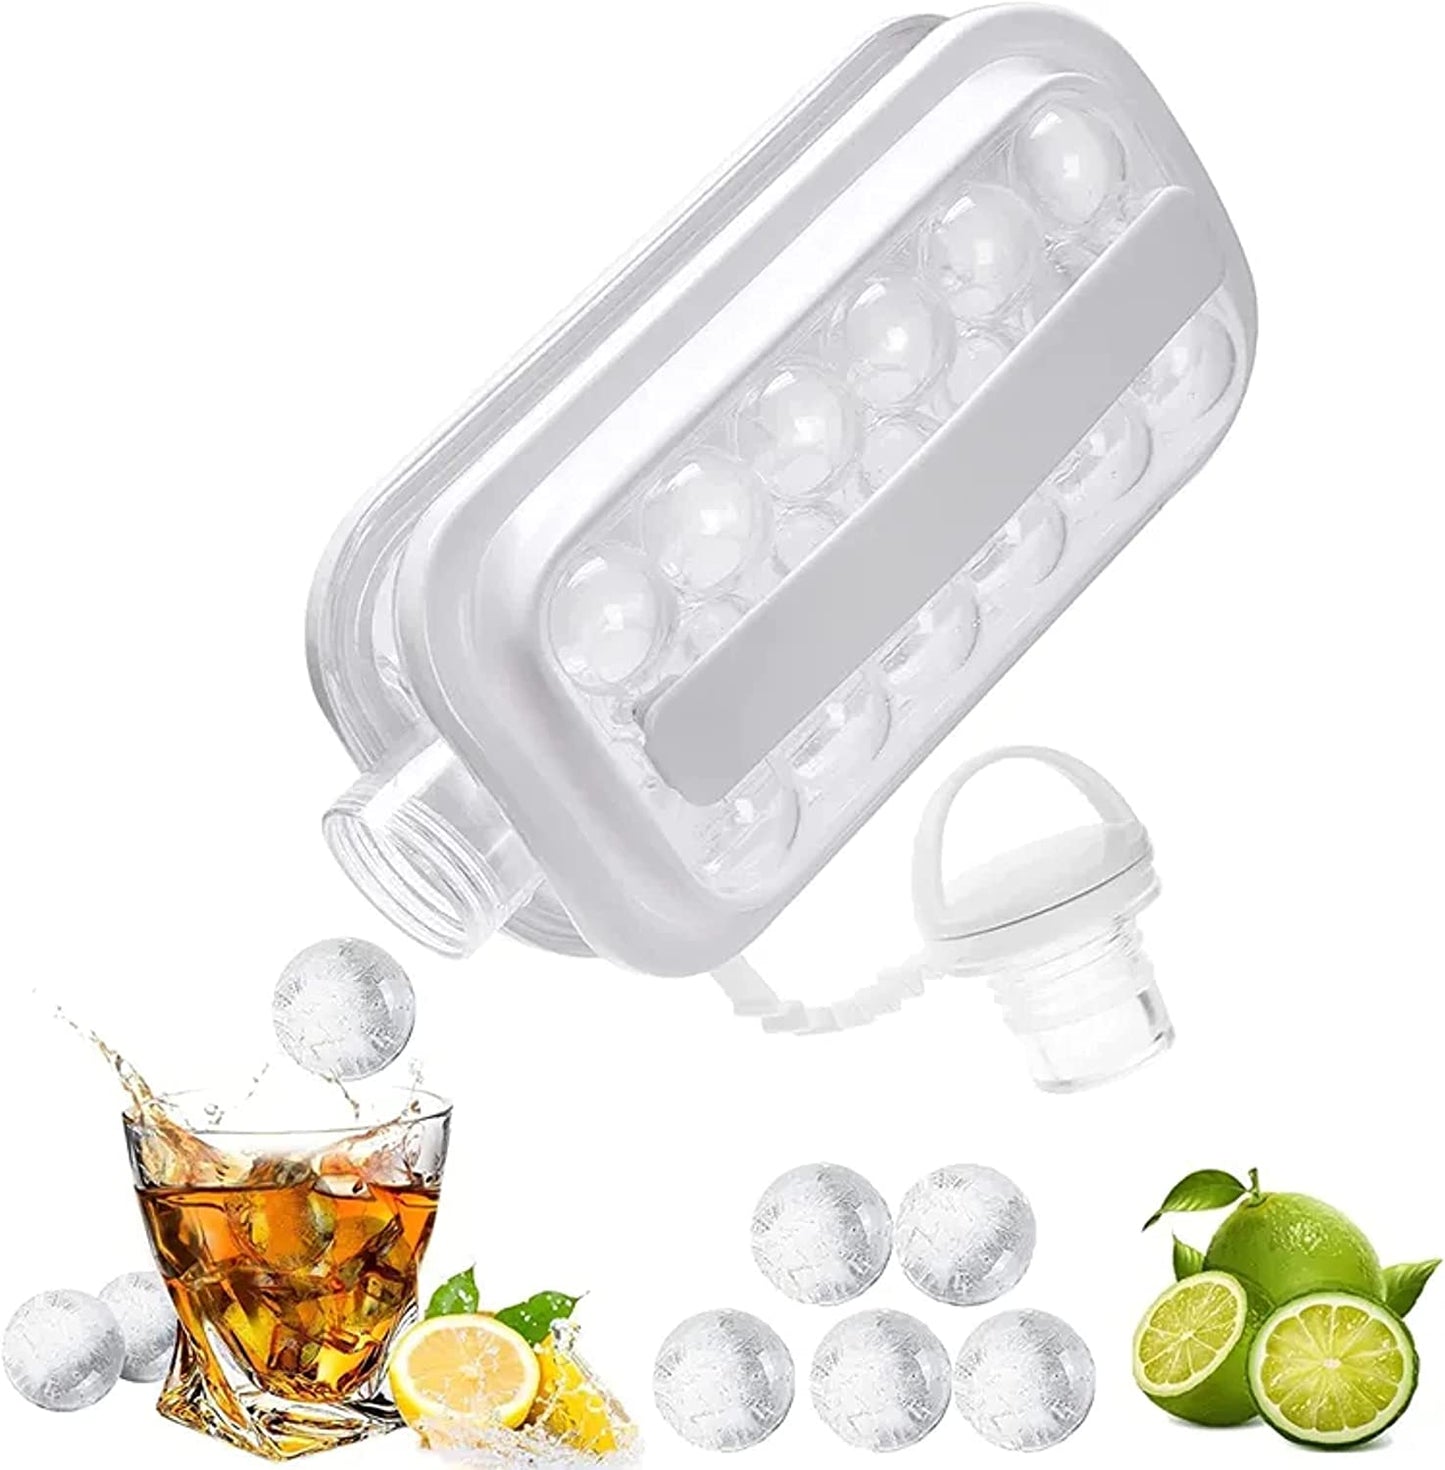 KING Bottle of Ice Balls, Ice Cube Tray and Ice Ball Maker 2 in 1 Bottle and Ice Cube Tray, Ice Machine for Perfect Ice Balls, Coffee, Juice, Water (White)